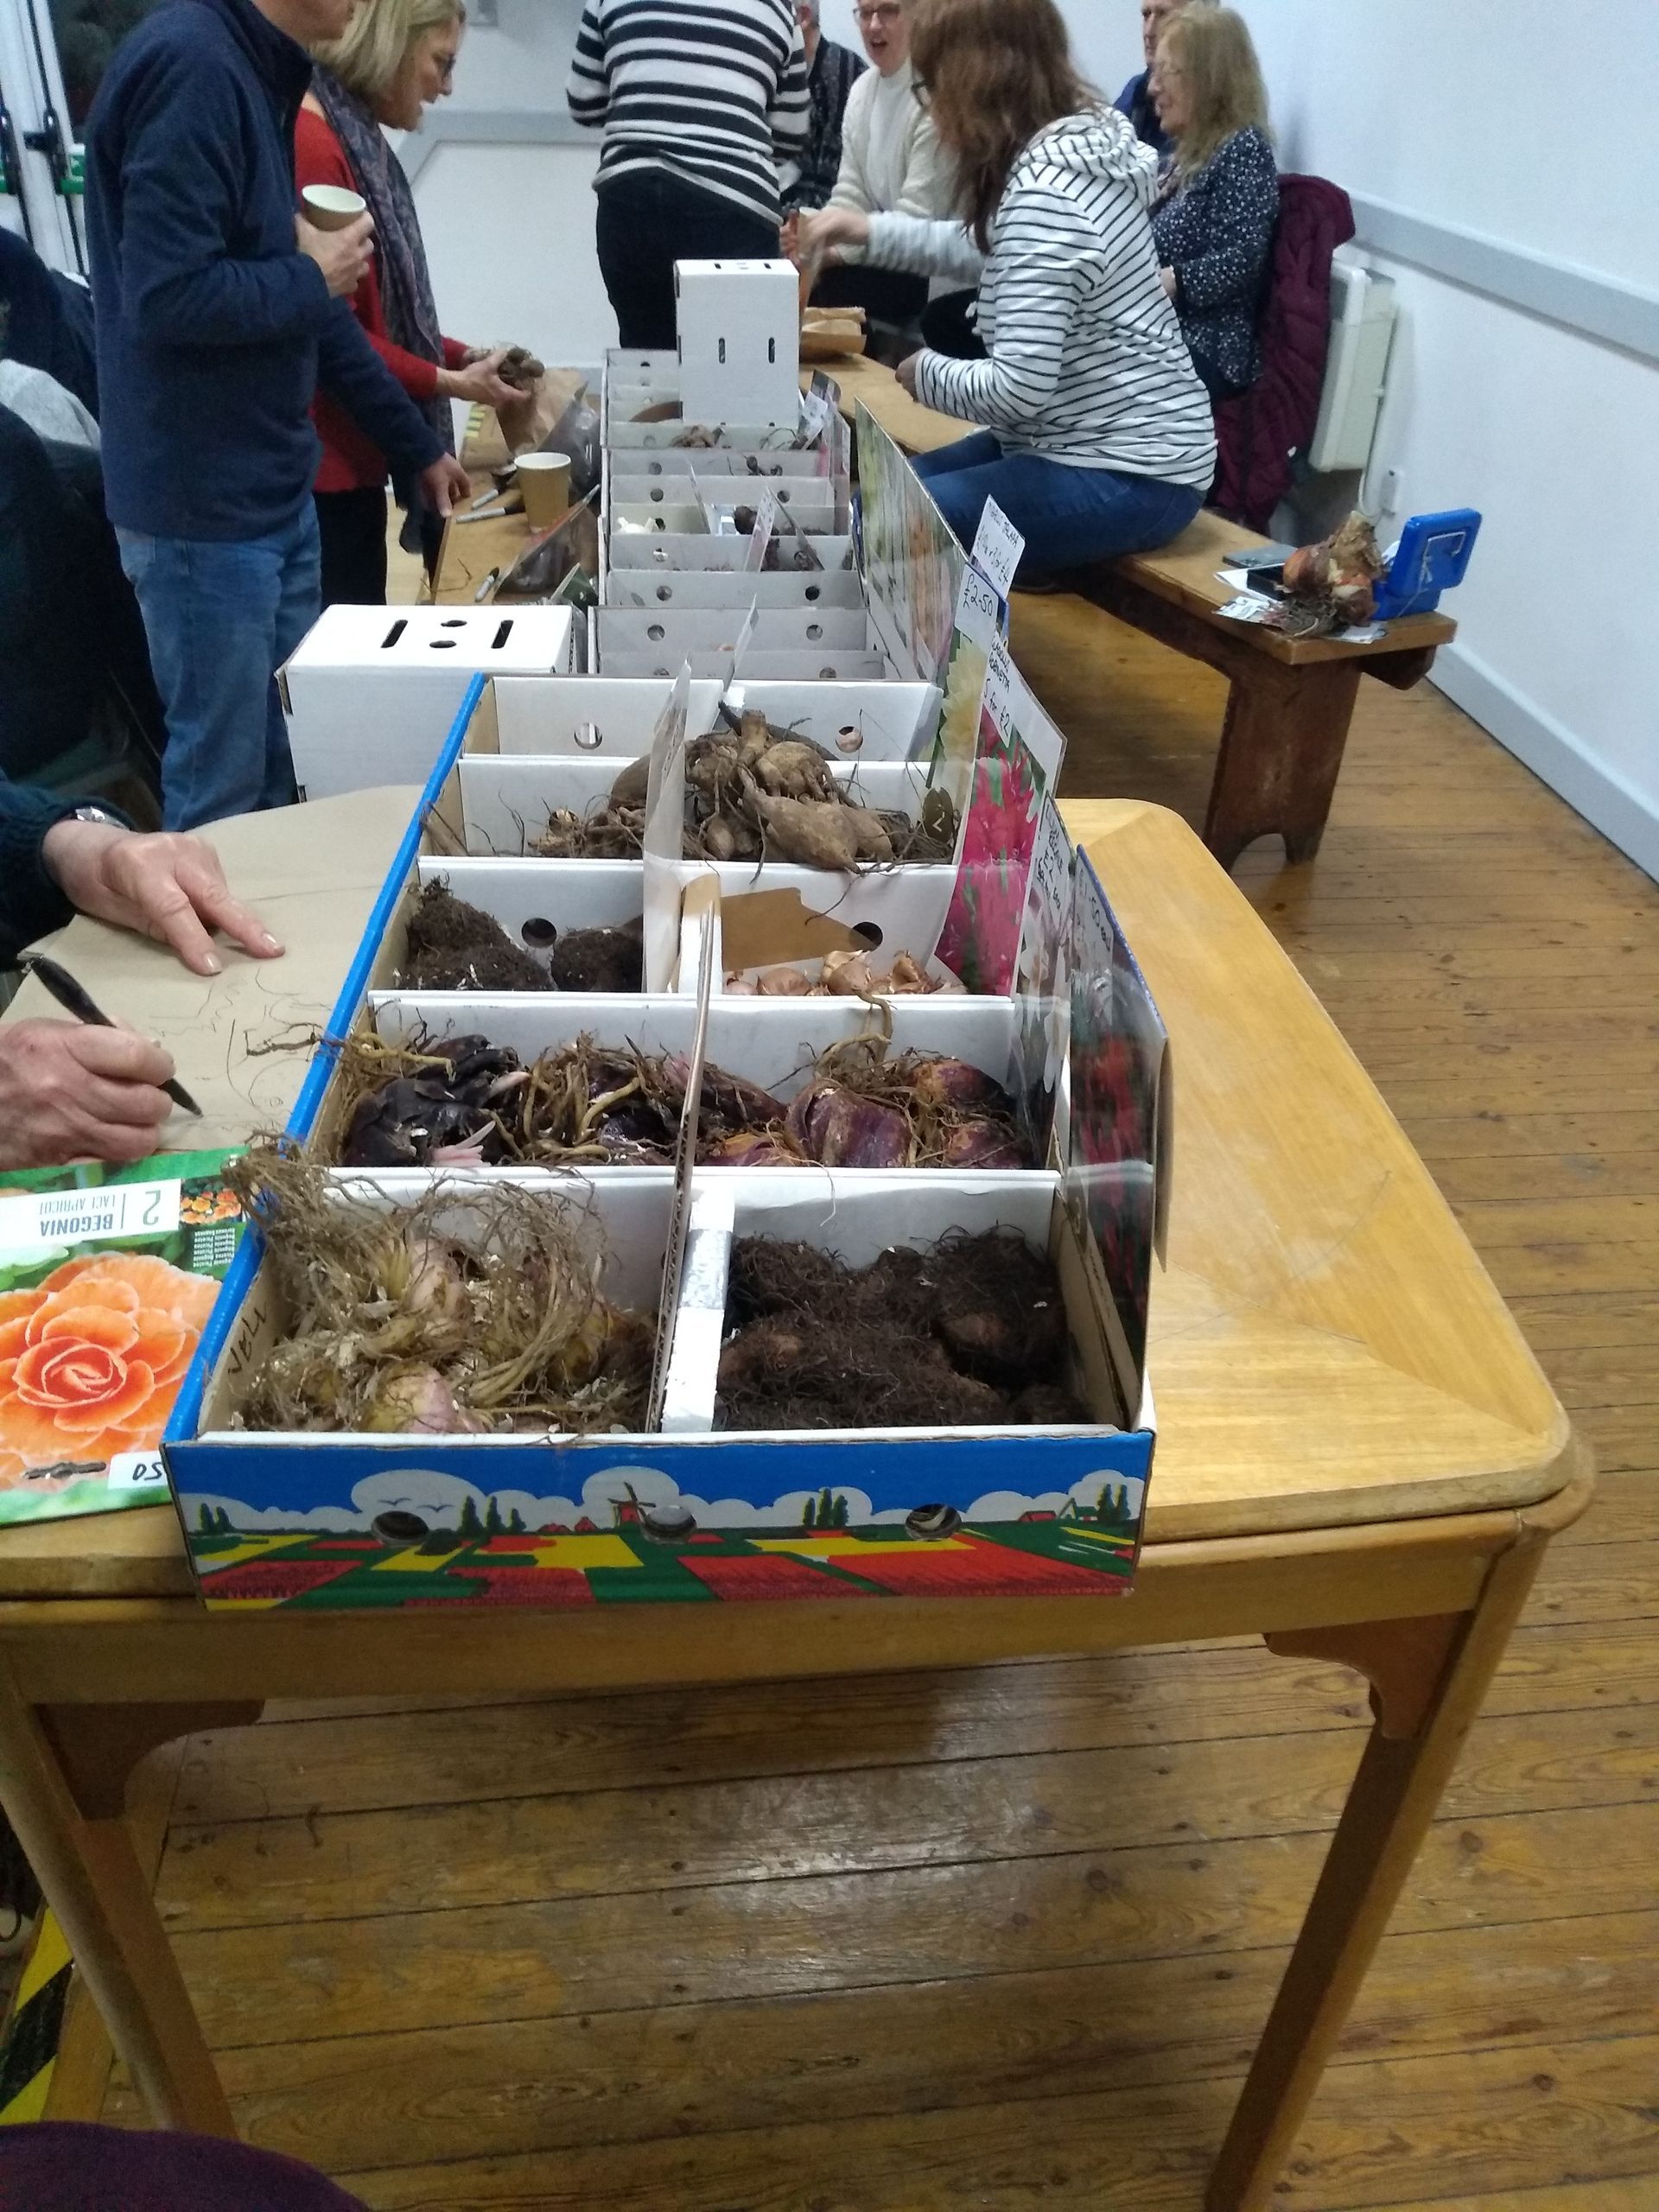 Members enjoyed looking at and purchasing a range of bulbs